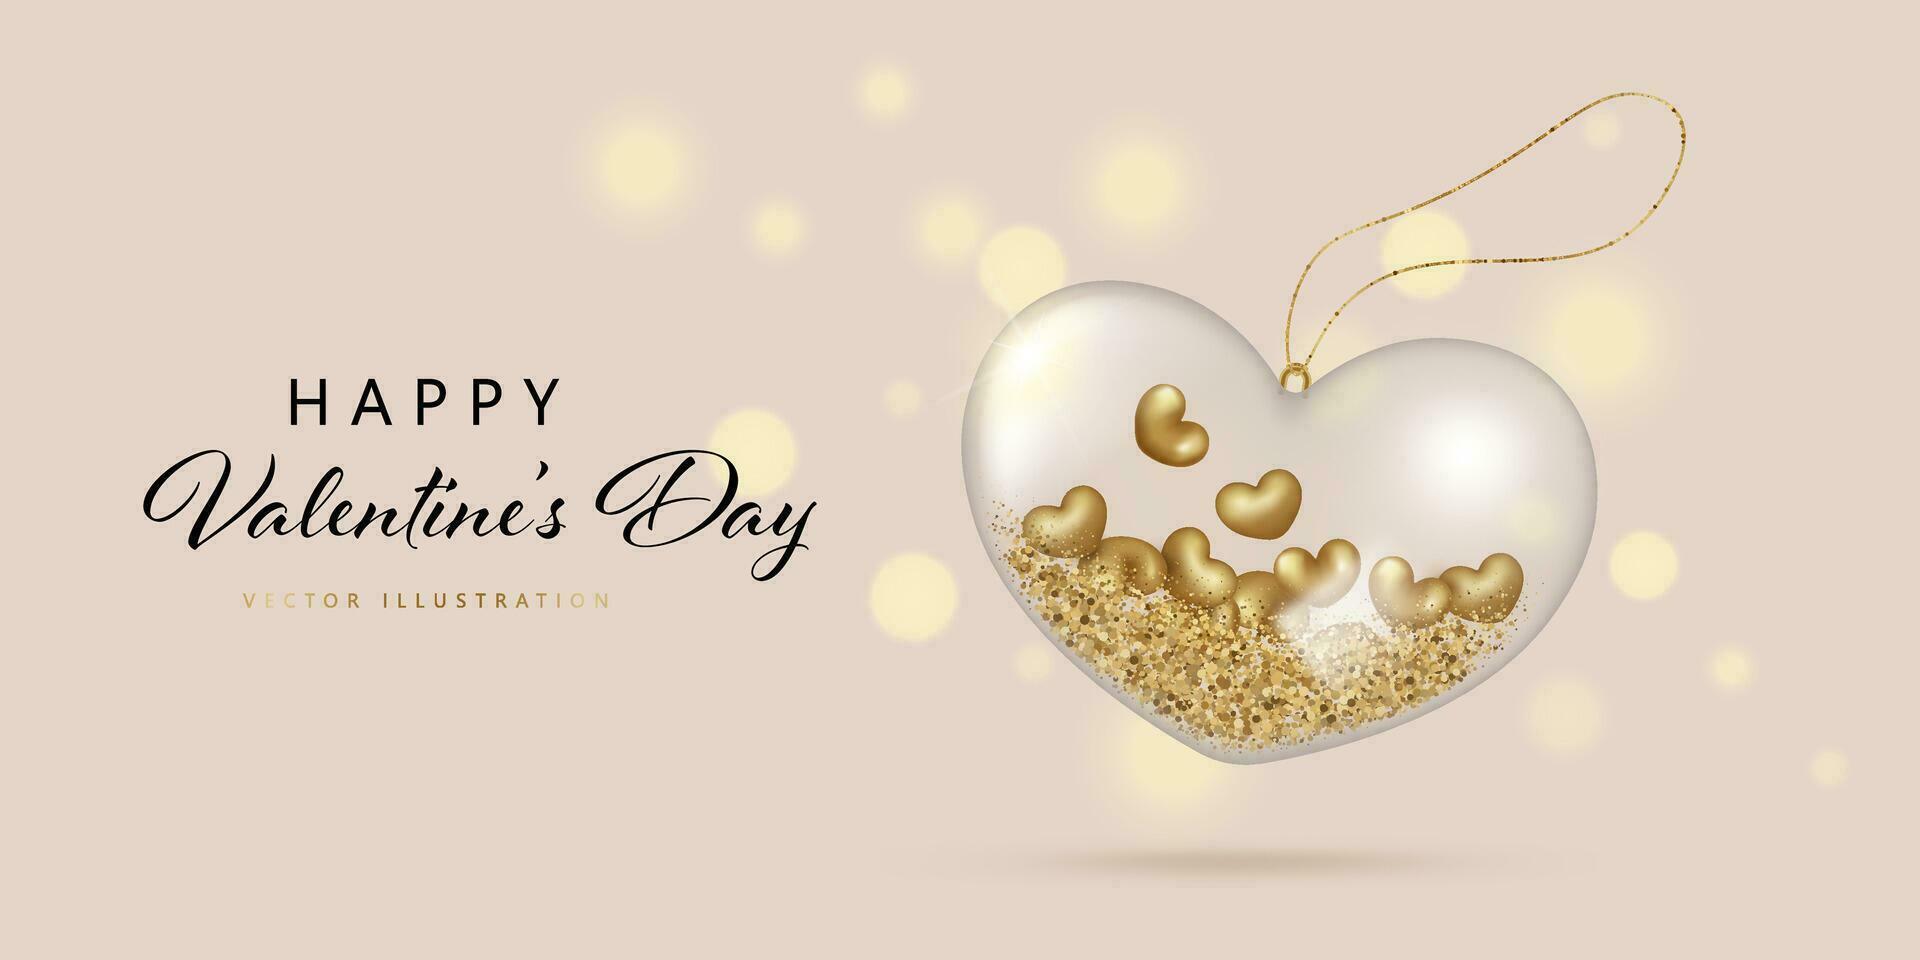 Valentines Day Elegant Banner with Transparent Glass Heart with glitter inside. Vector illustration in a 3D style